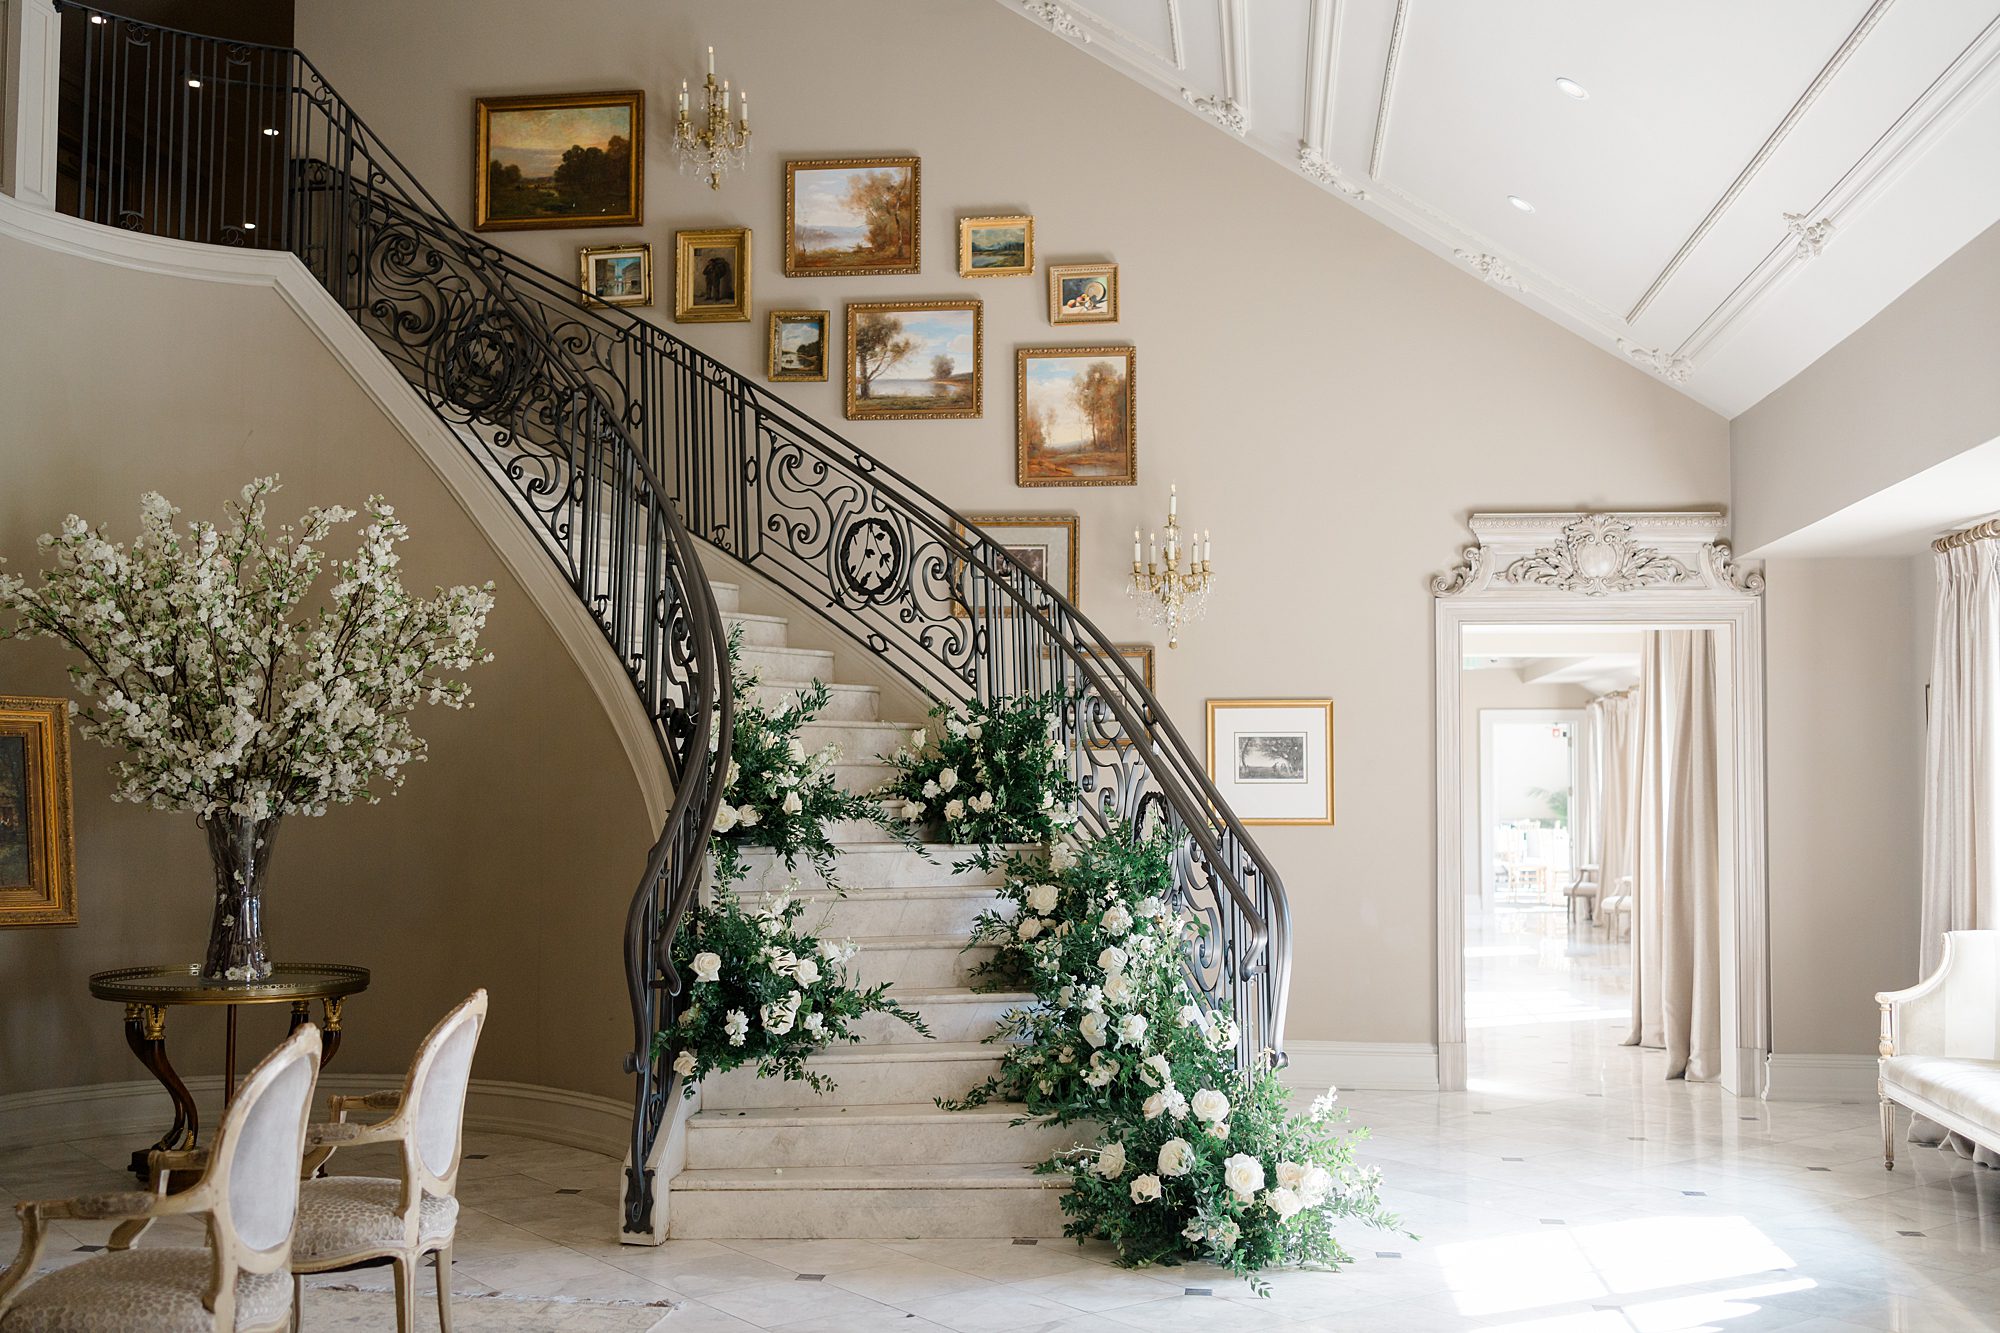 winding staircase inside Dreamy Park Chateau Wedding venue